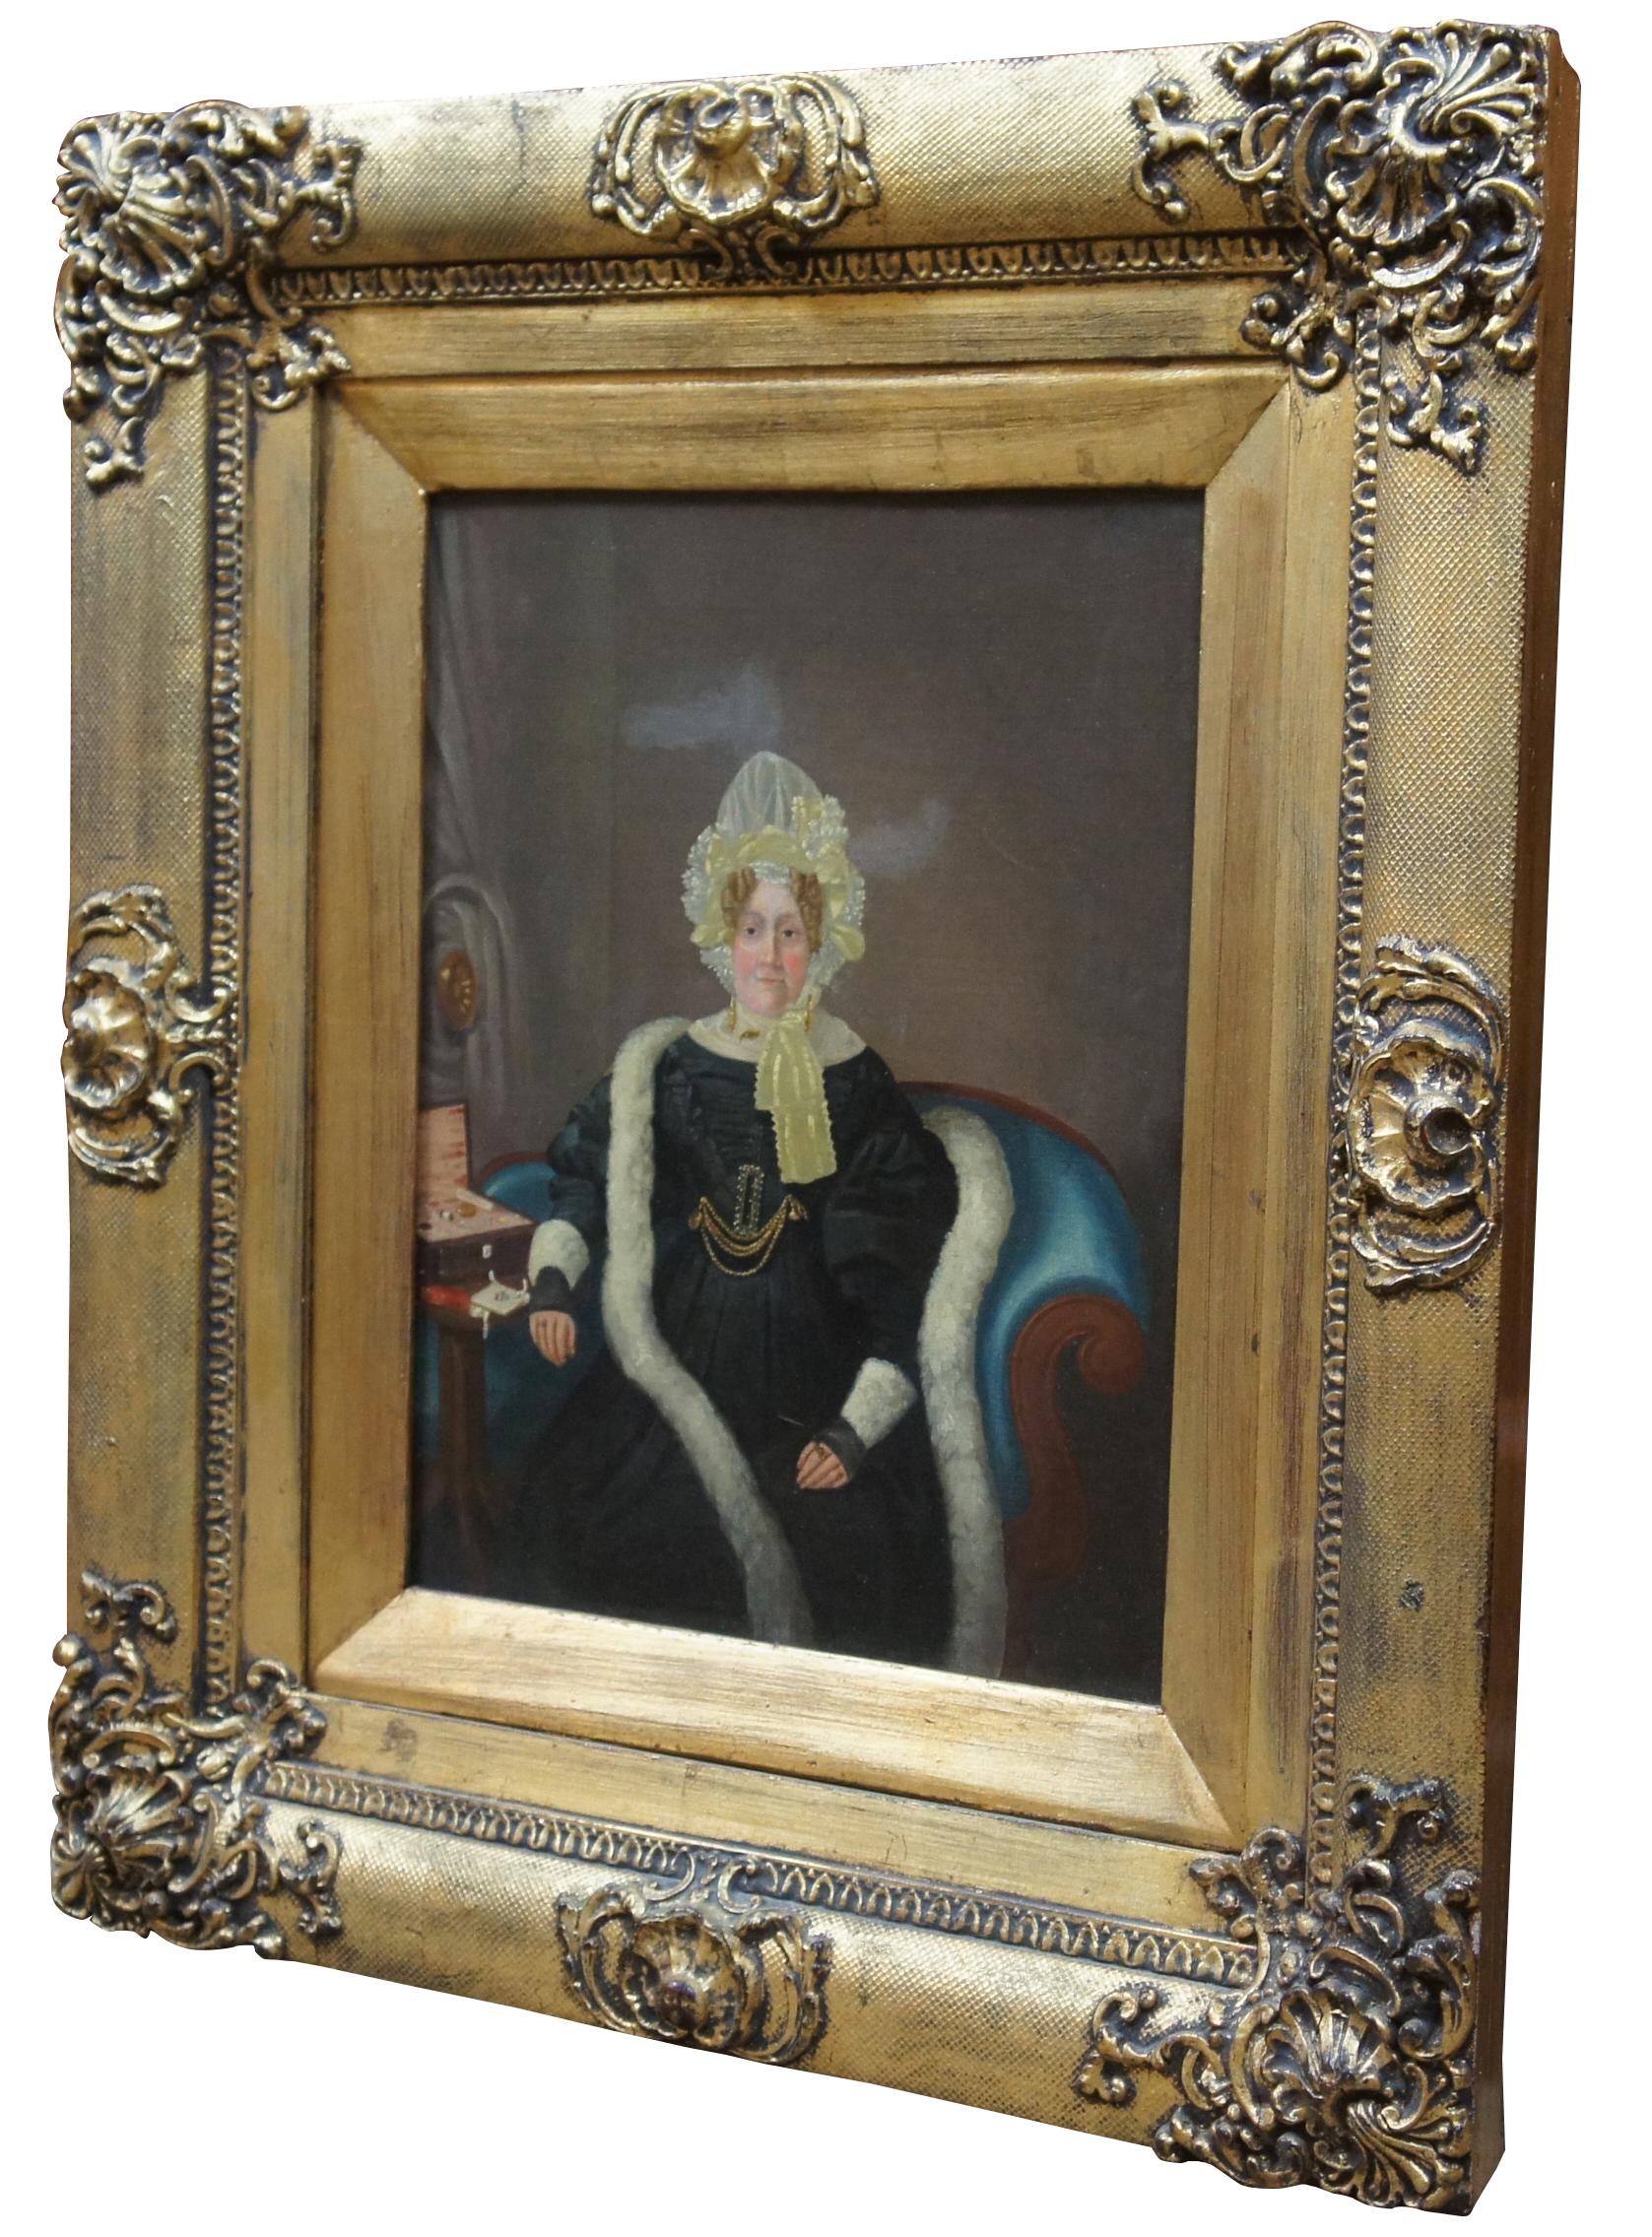 Antique early Victorian portrait painting of a wealthy woman / aristocrat in black, wearing a bonnet, ornate gold frame.
   
Sans Frame - 10.25” x 13”